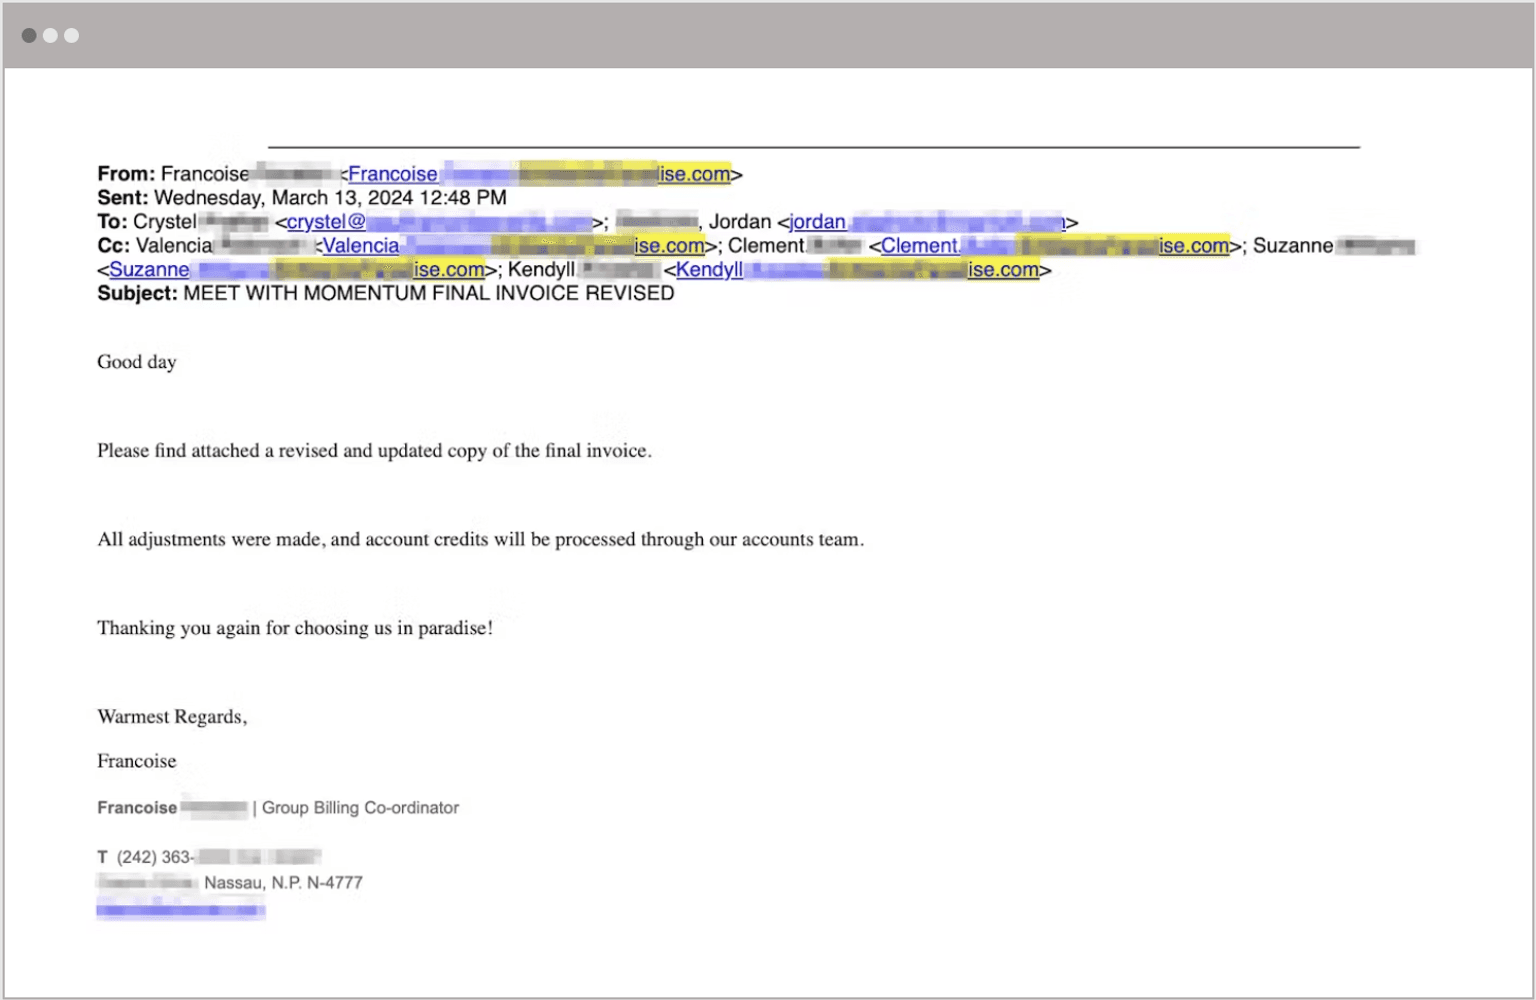 Thread Hijacking Email Example 2